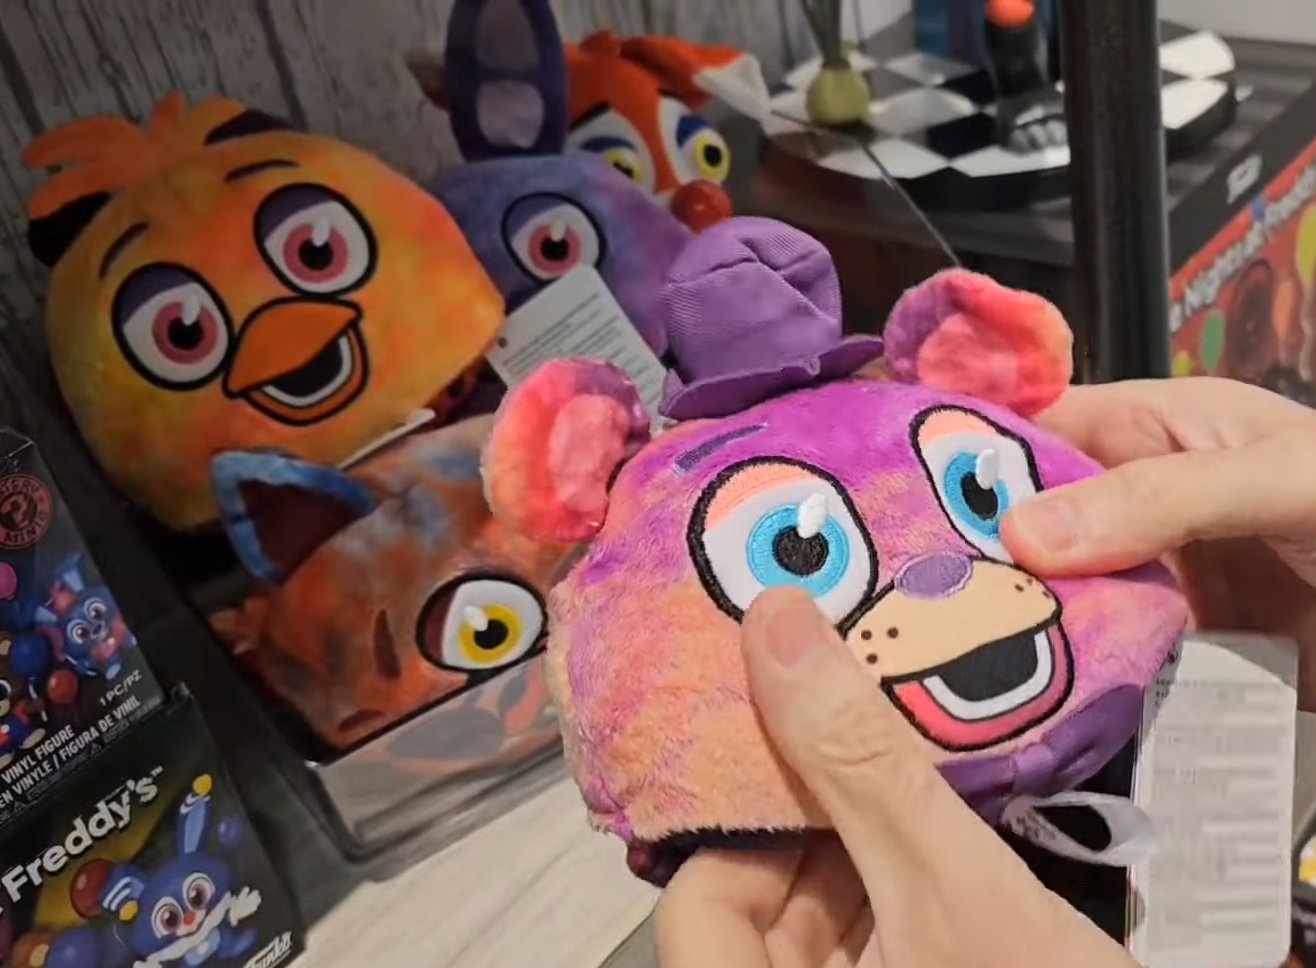 JonnyBlox on X: FNaF News: Austin from YouTooz has revealed the design of  their upcoming Sun figure! He also confirms Candy and Ignited Freddy  plushies are coming alongside the recently-revealed Popgoes plush.